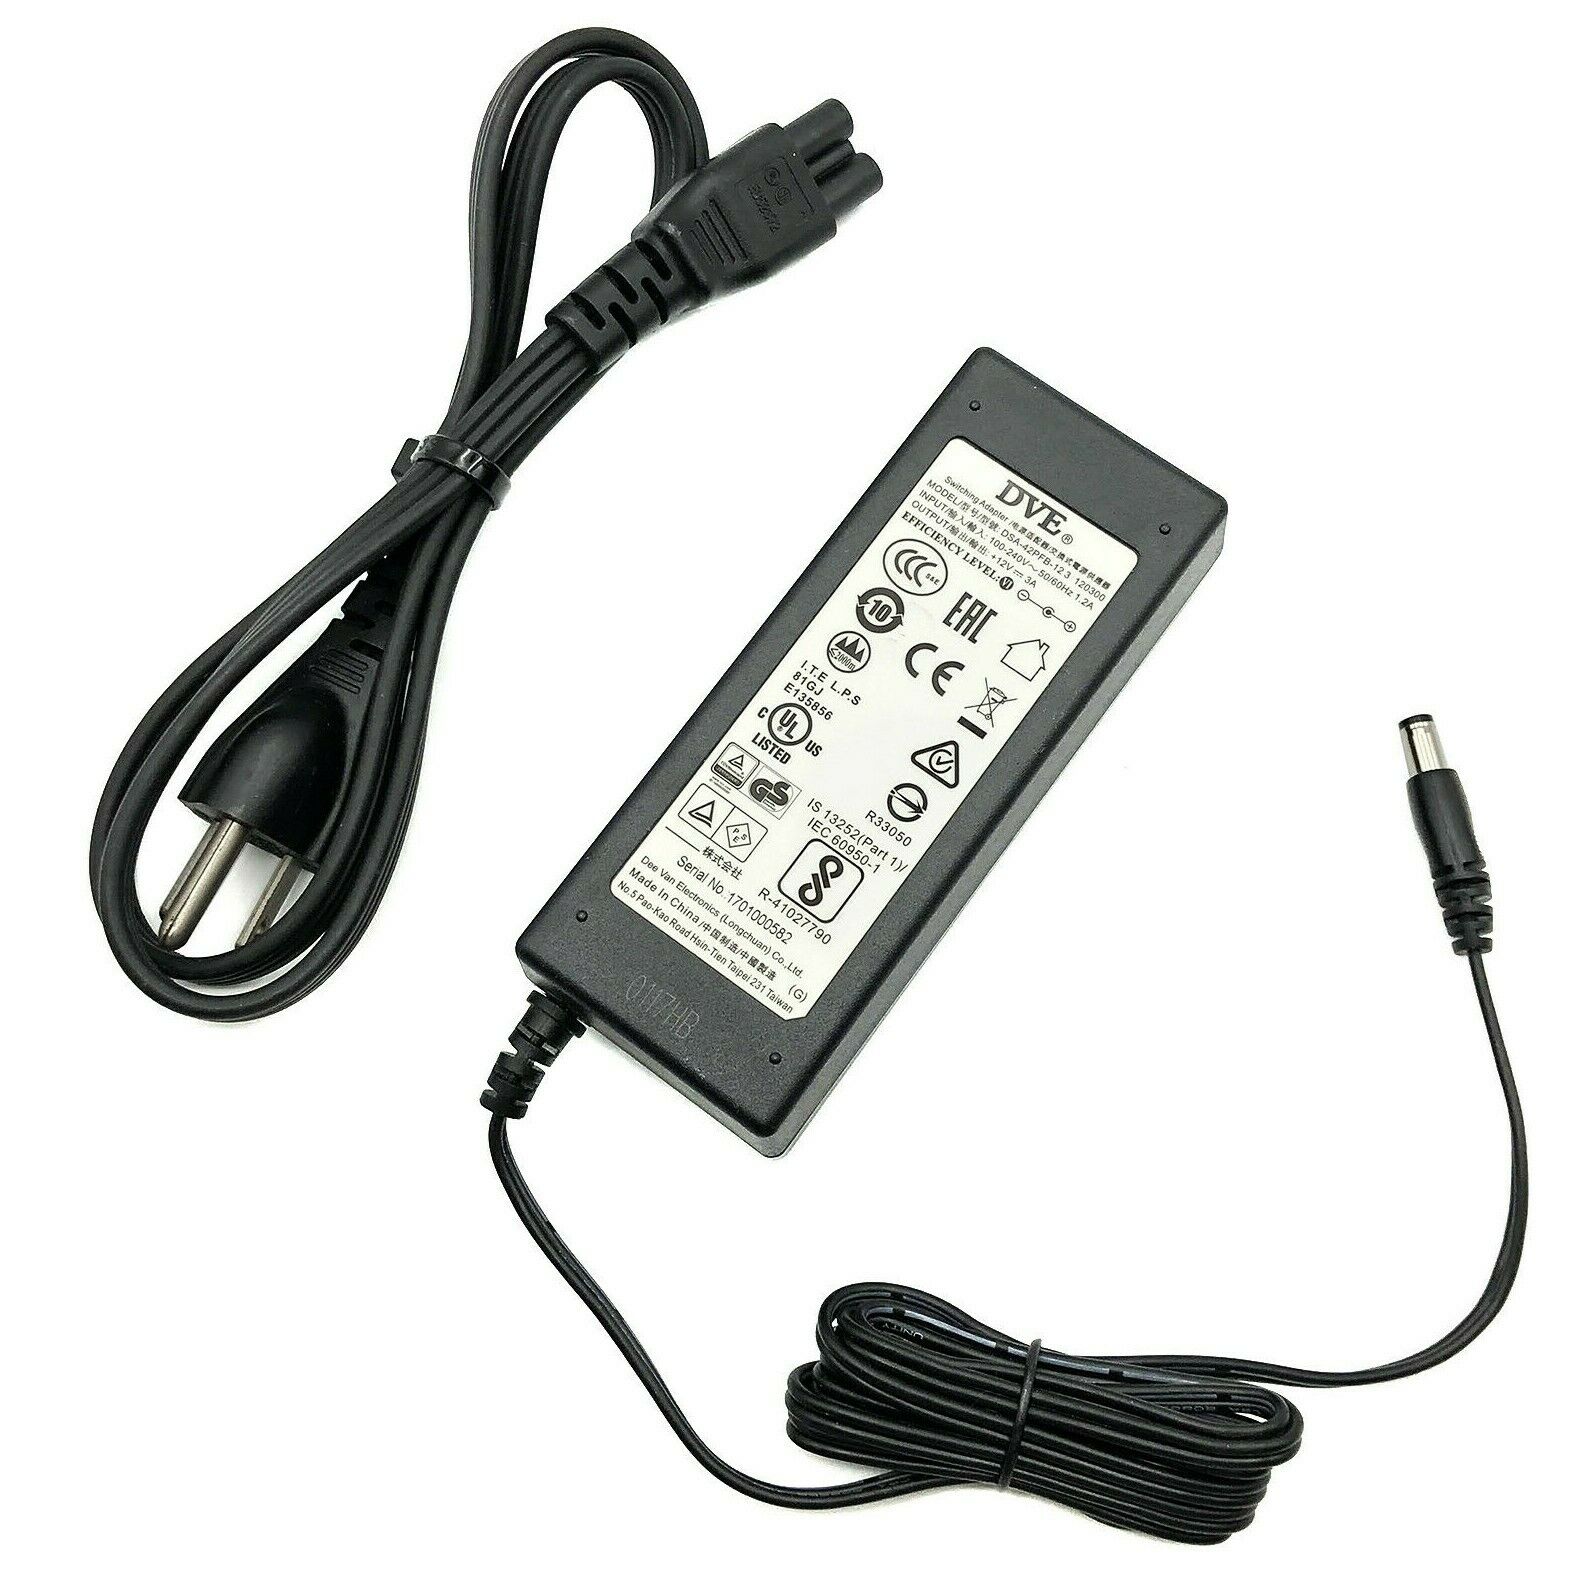 Genuine DVE AC Adapter For Sony D-VE7000S DVD Walkman Player Charger w/PC OEM Com - Click Image to Close